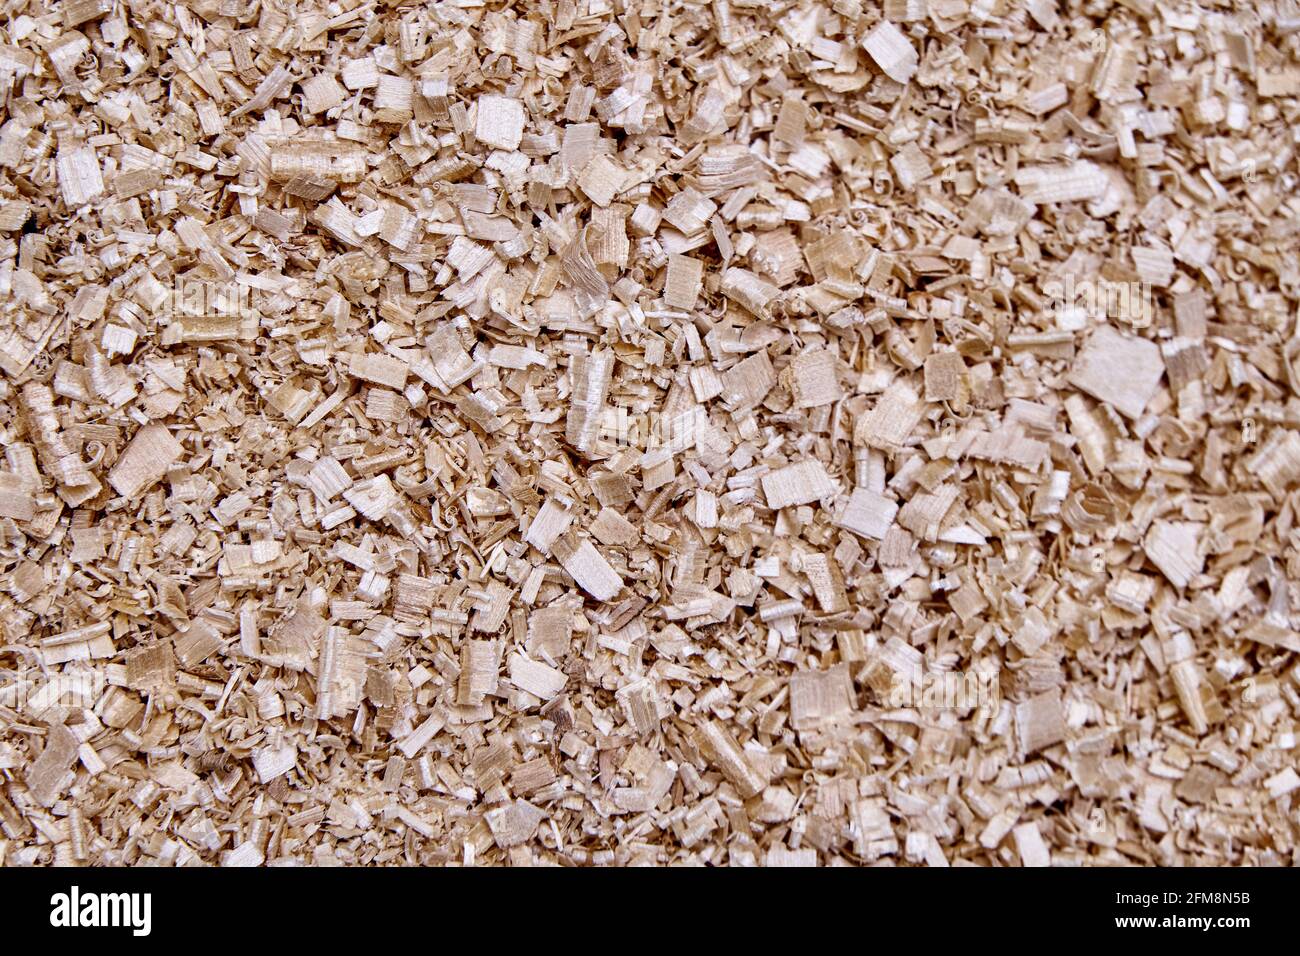 Large pile of beige birch shavings after solid wood processing for furniture production as background extreme close upper view Stock Photo